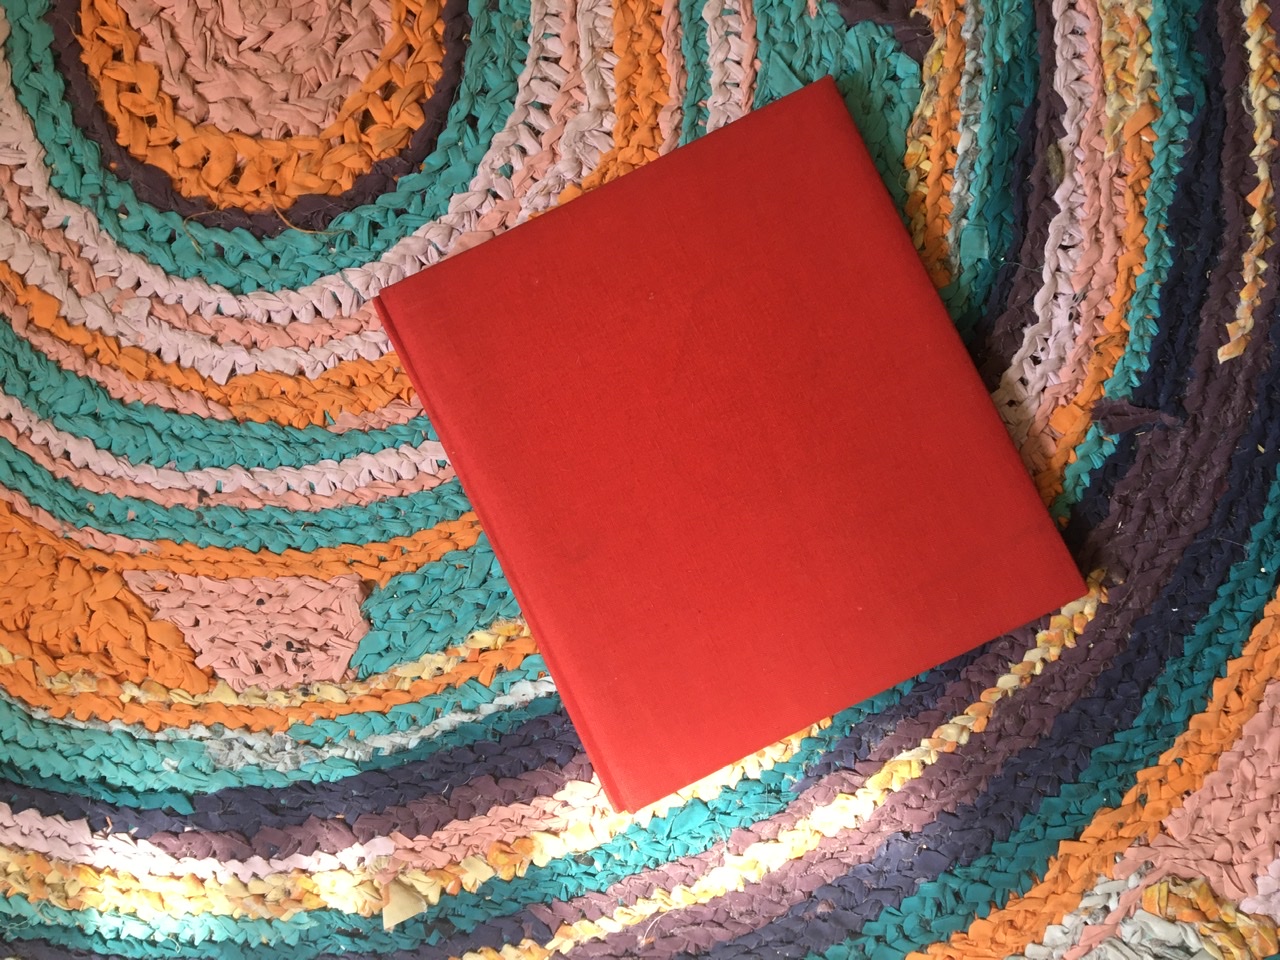 A red photo album on my colorful concentric circle rag rug in my apartment in Boston.